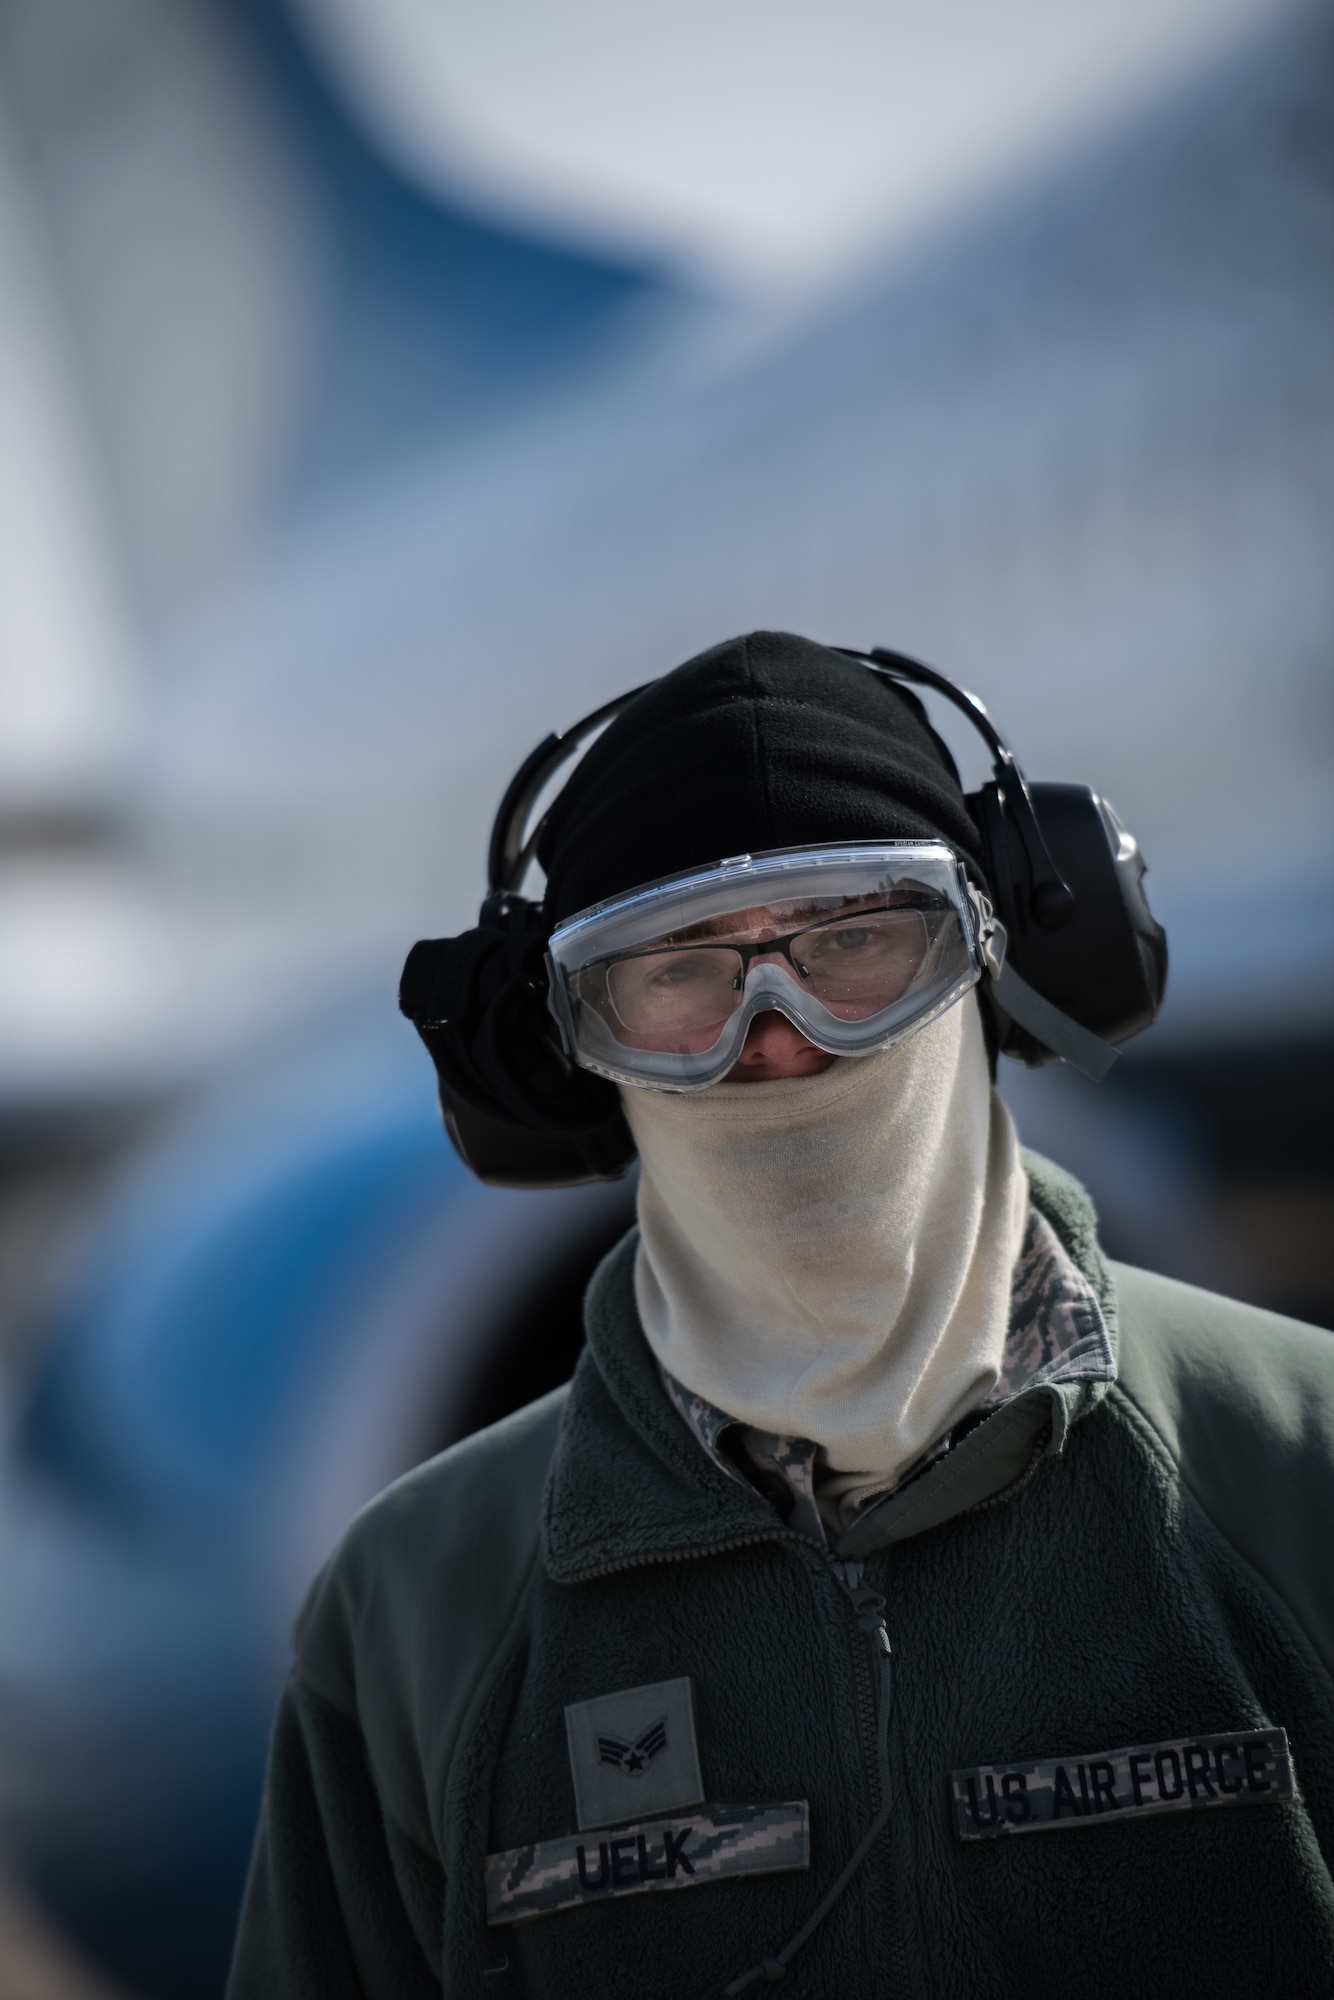 The polar vortex can't stop the 932nd Airlift Wing flight line crew chief from completing his mission and launching aircraft.